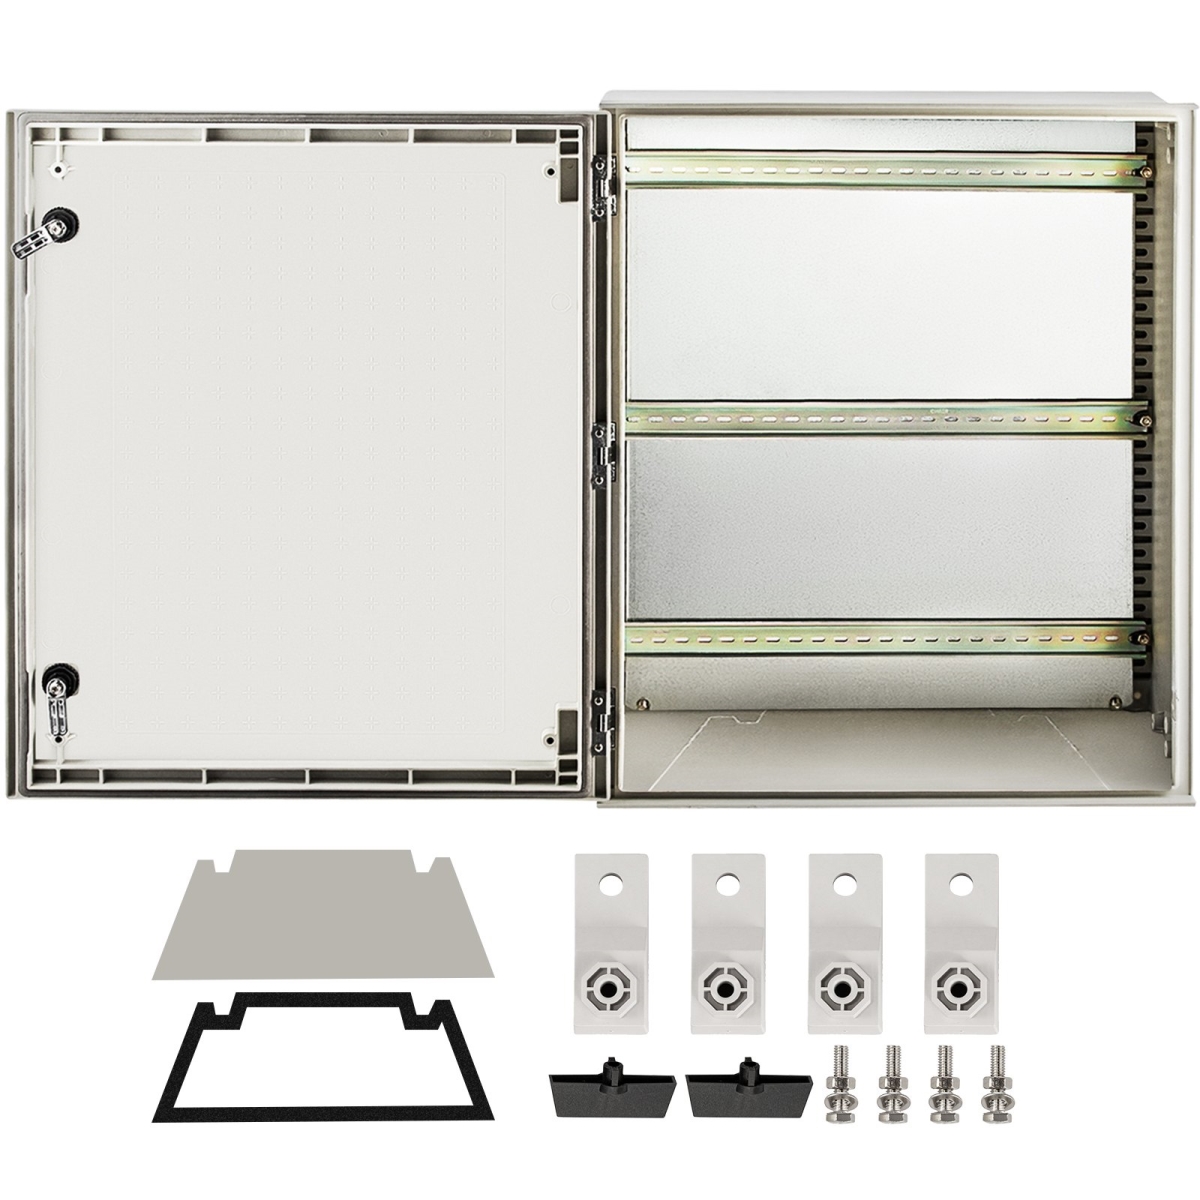 Picture of Vevor DQXFSBLG60X50X231V0 24 x 20 x 9 in. NEMA 4X Fiberglass Electrical Steel Enclosure with Mounting Plate